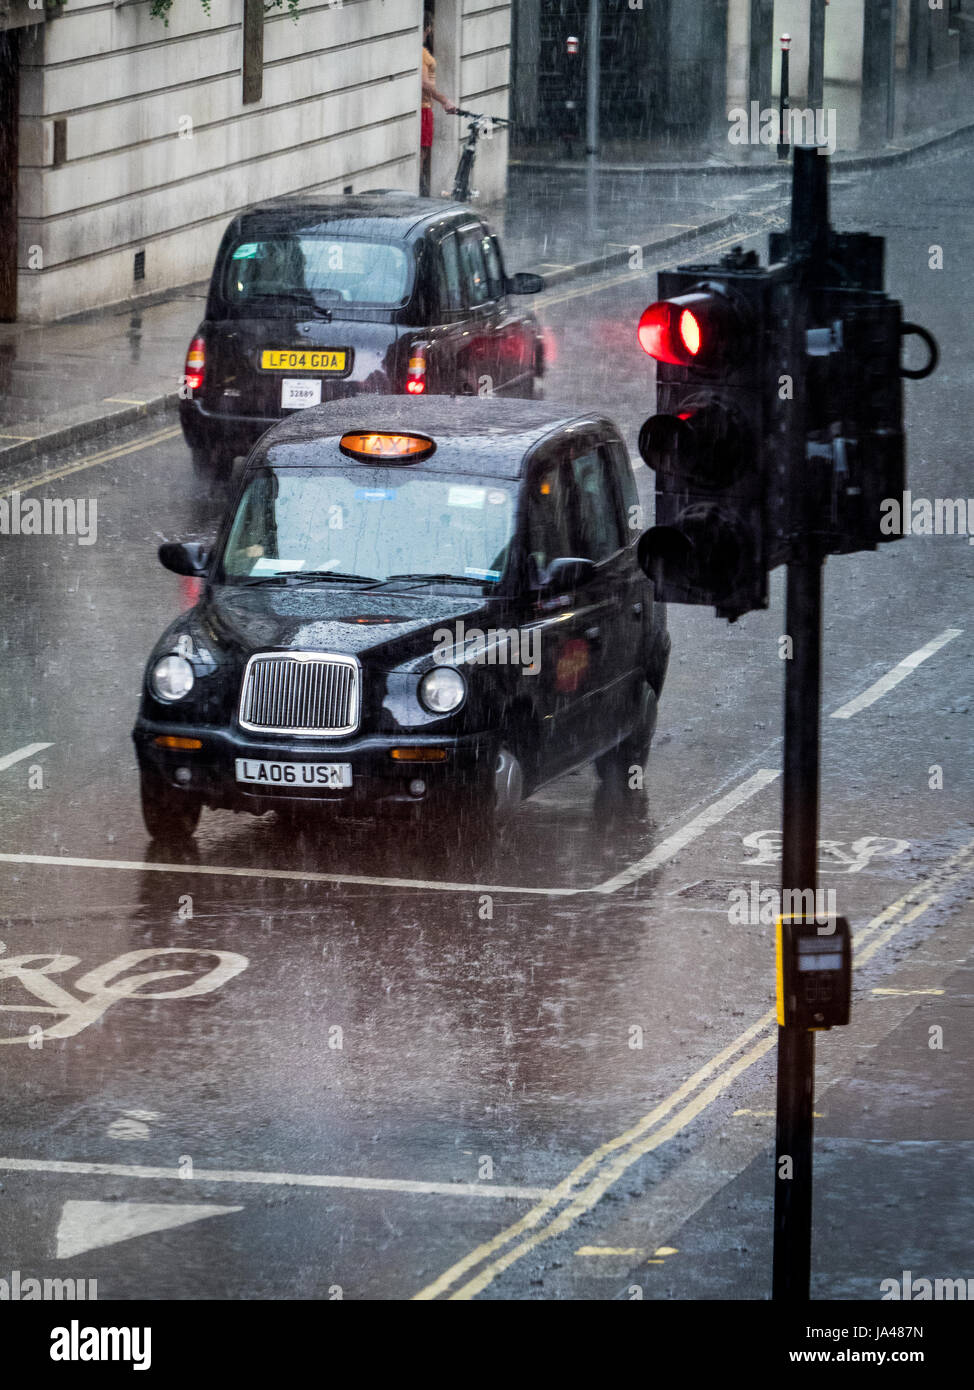 London Taxi in the rain. London Taxi Black Cab stops at traffic lights in a downpour. Stock Photo